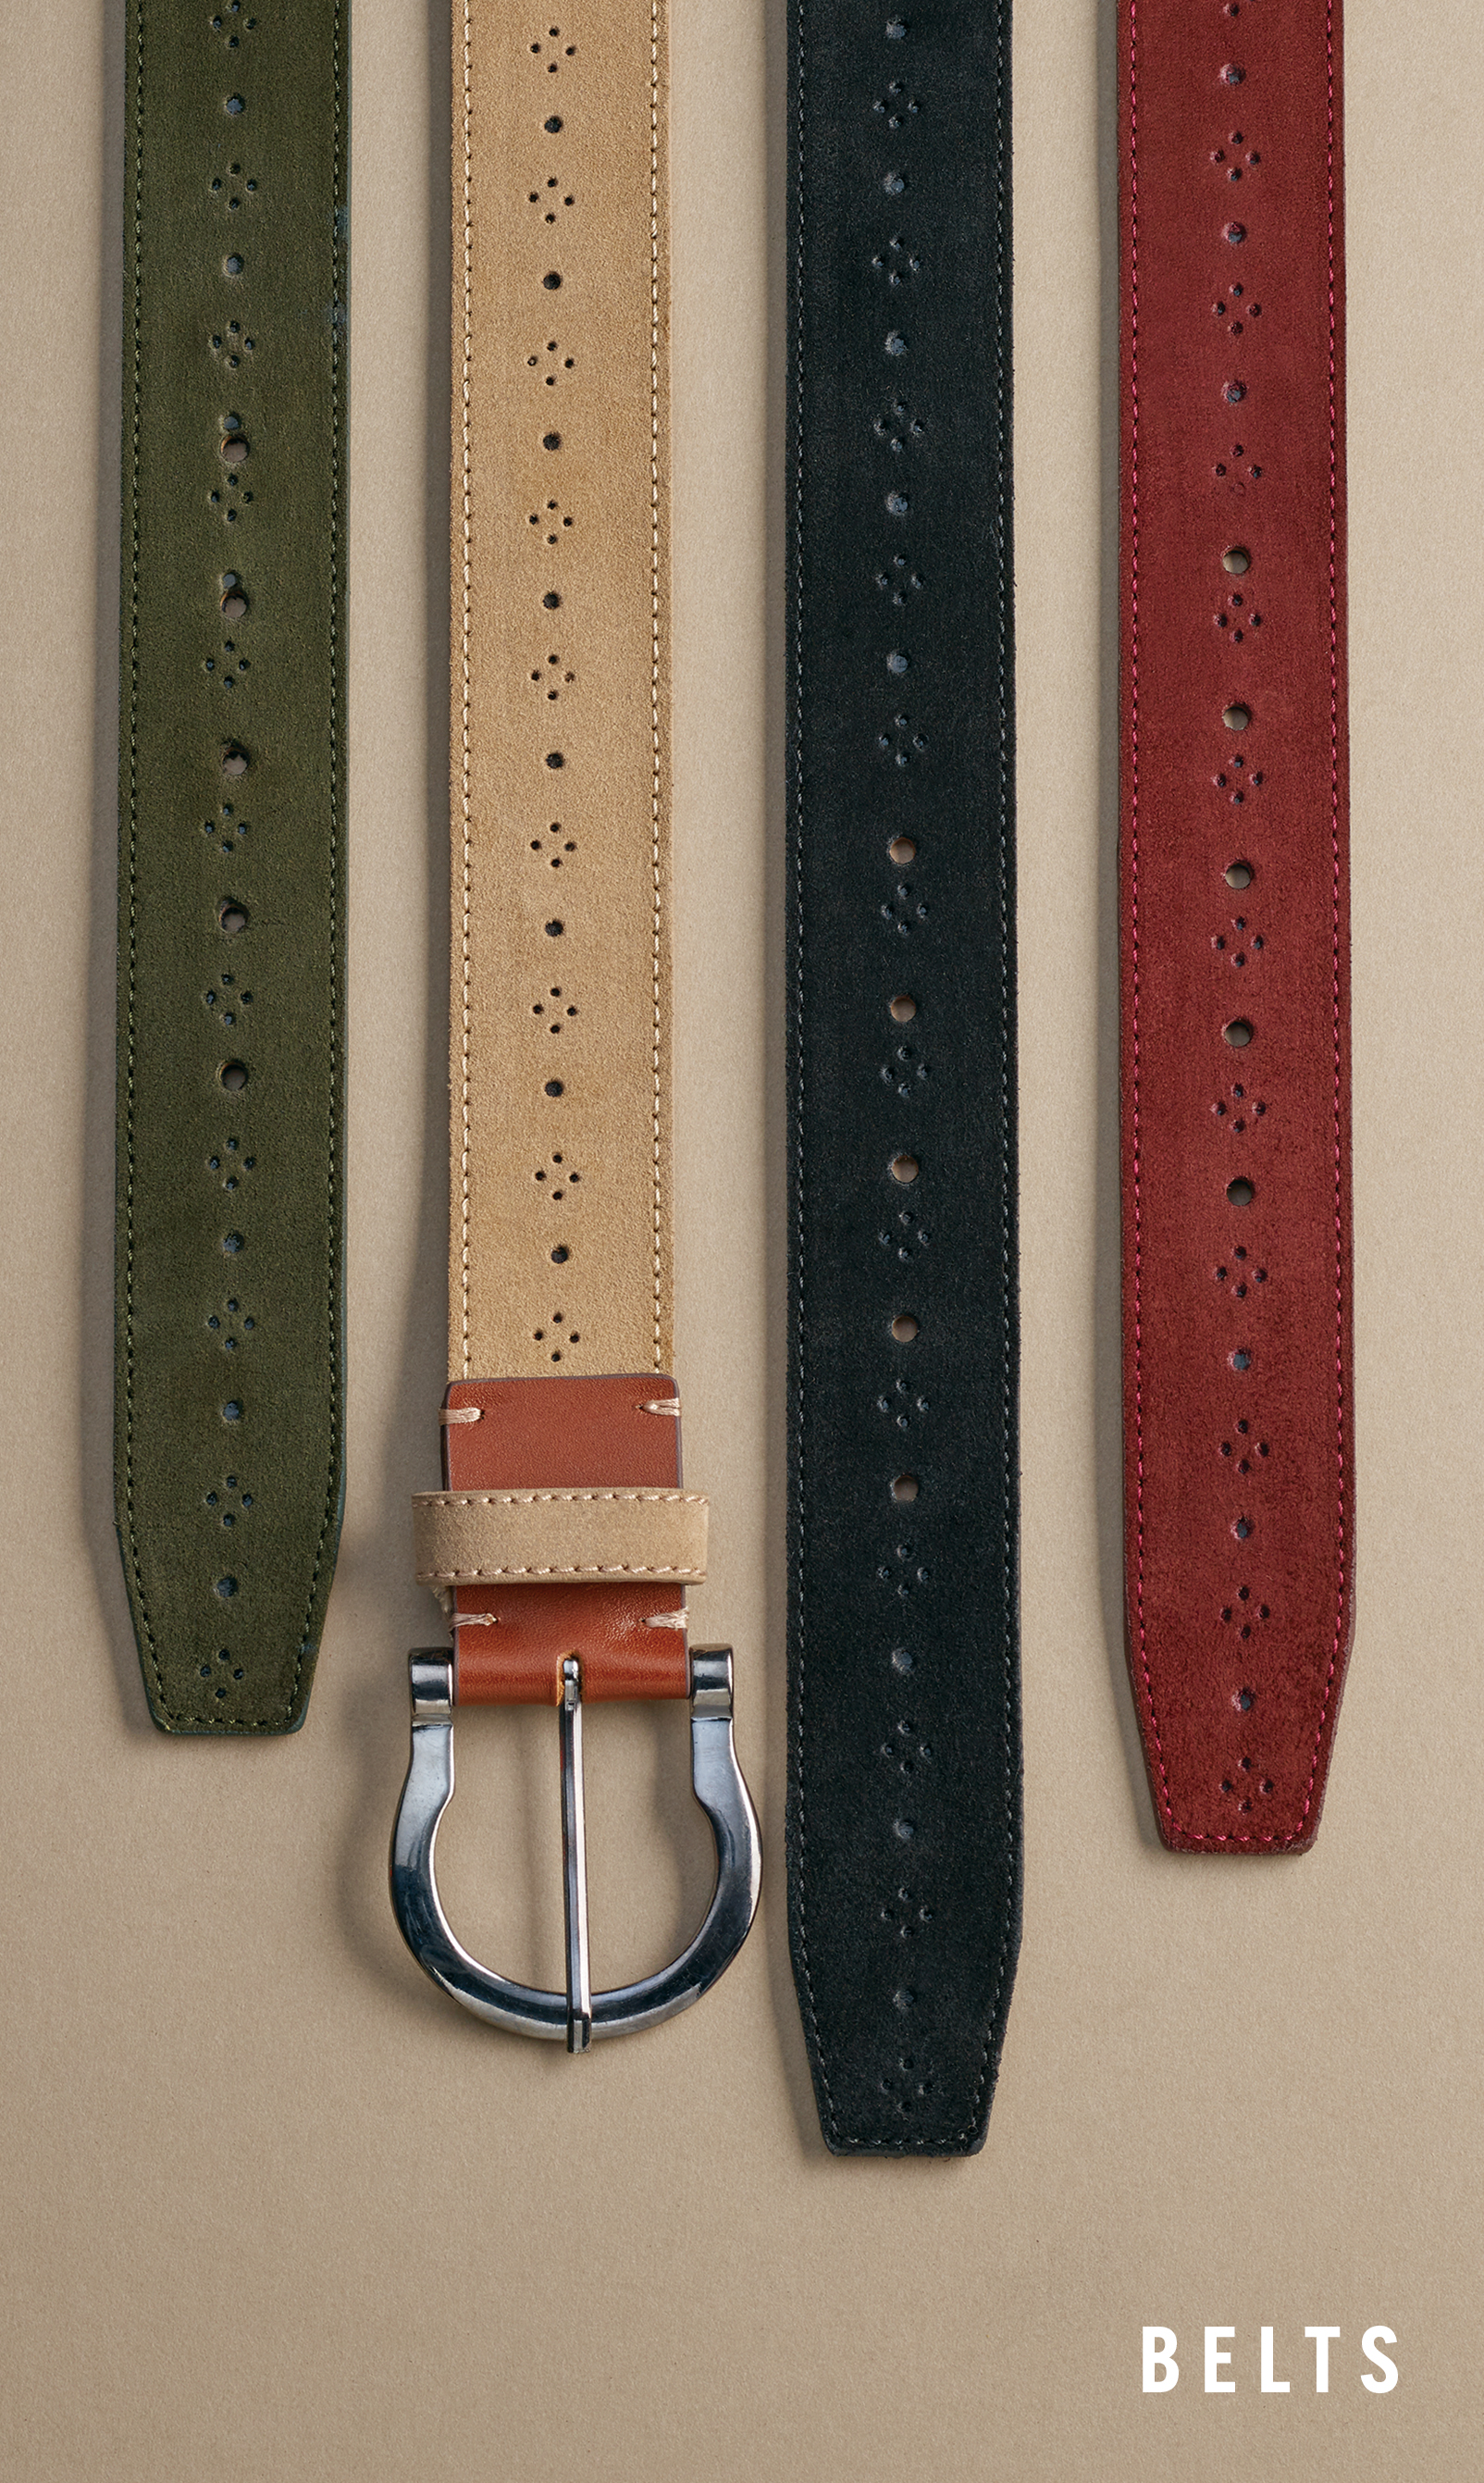 Men's Casual Wear category. The image features the Richmond Reversible Belt collection in multiple colors. 